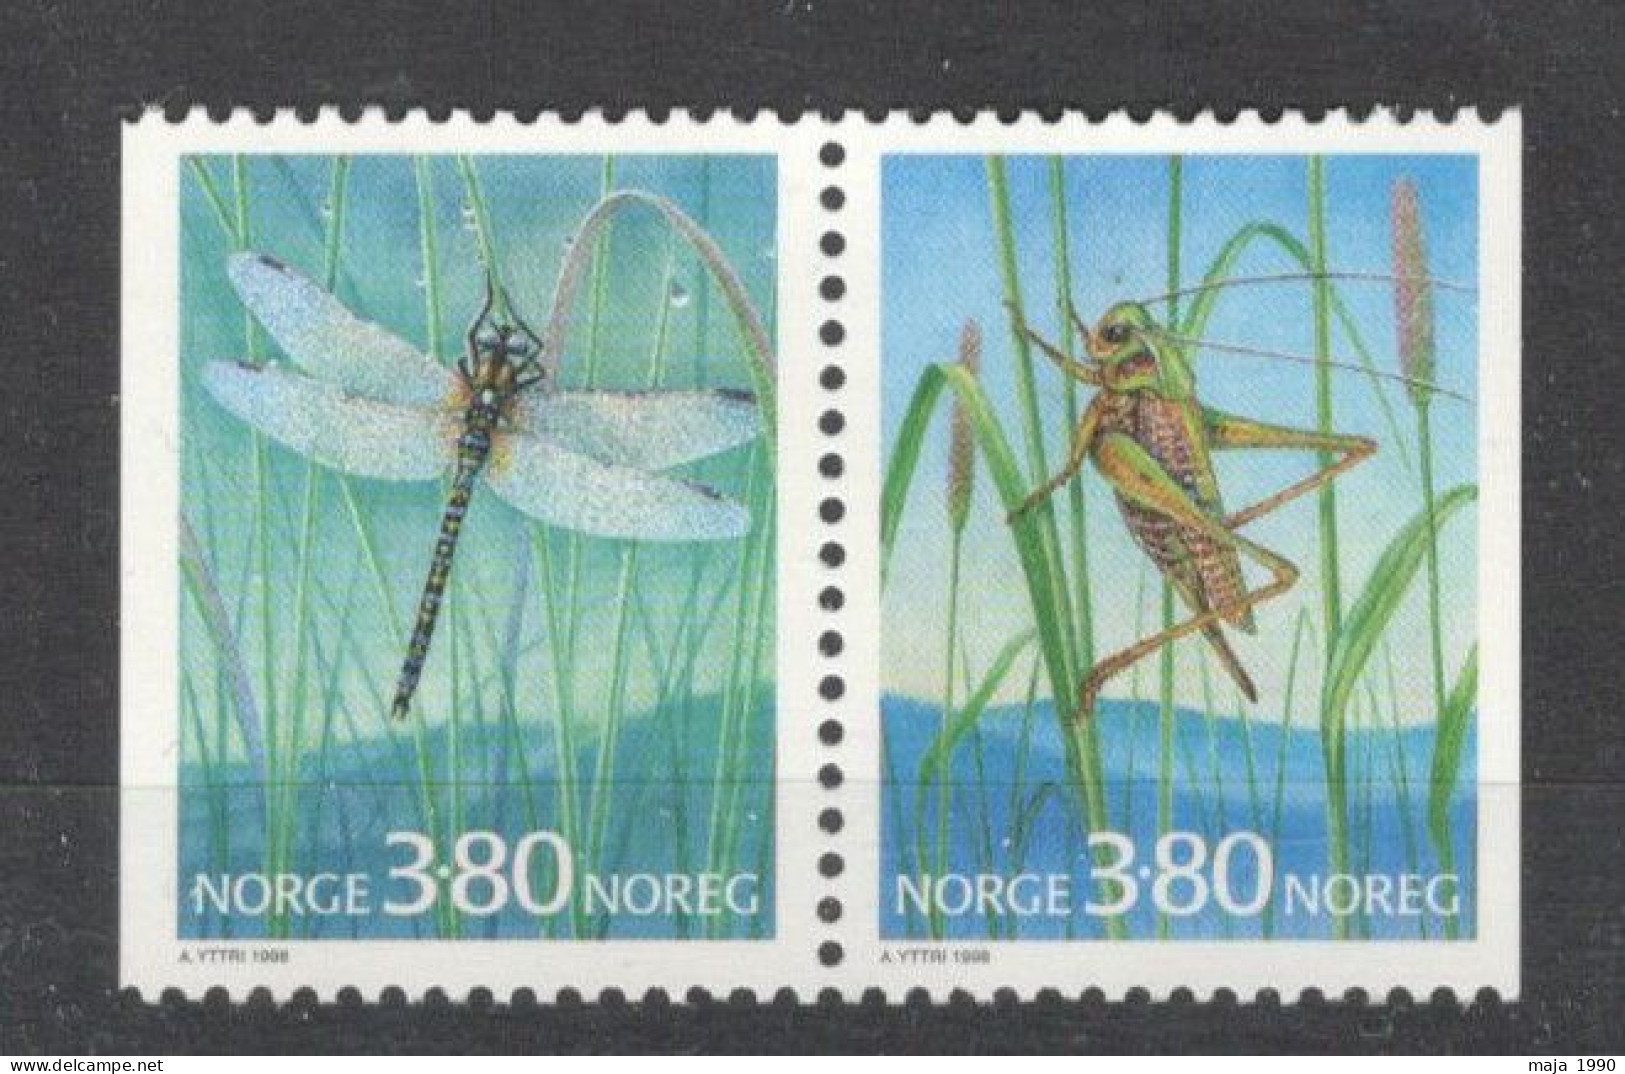 NORWAY - MNH PAIR - FAUNA - INSECTS - Mi.No. 1275/76 - 1998. - Unused Stamps